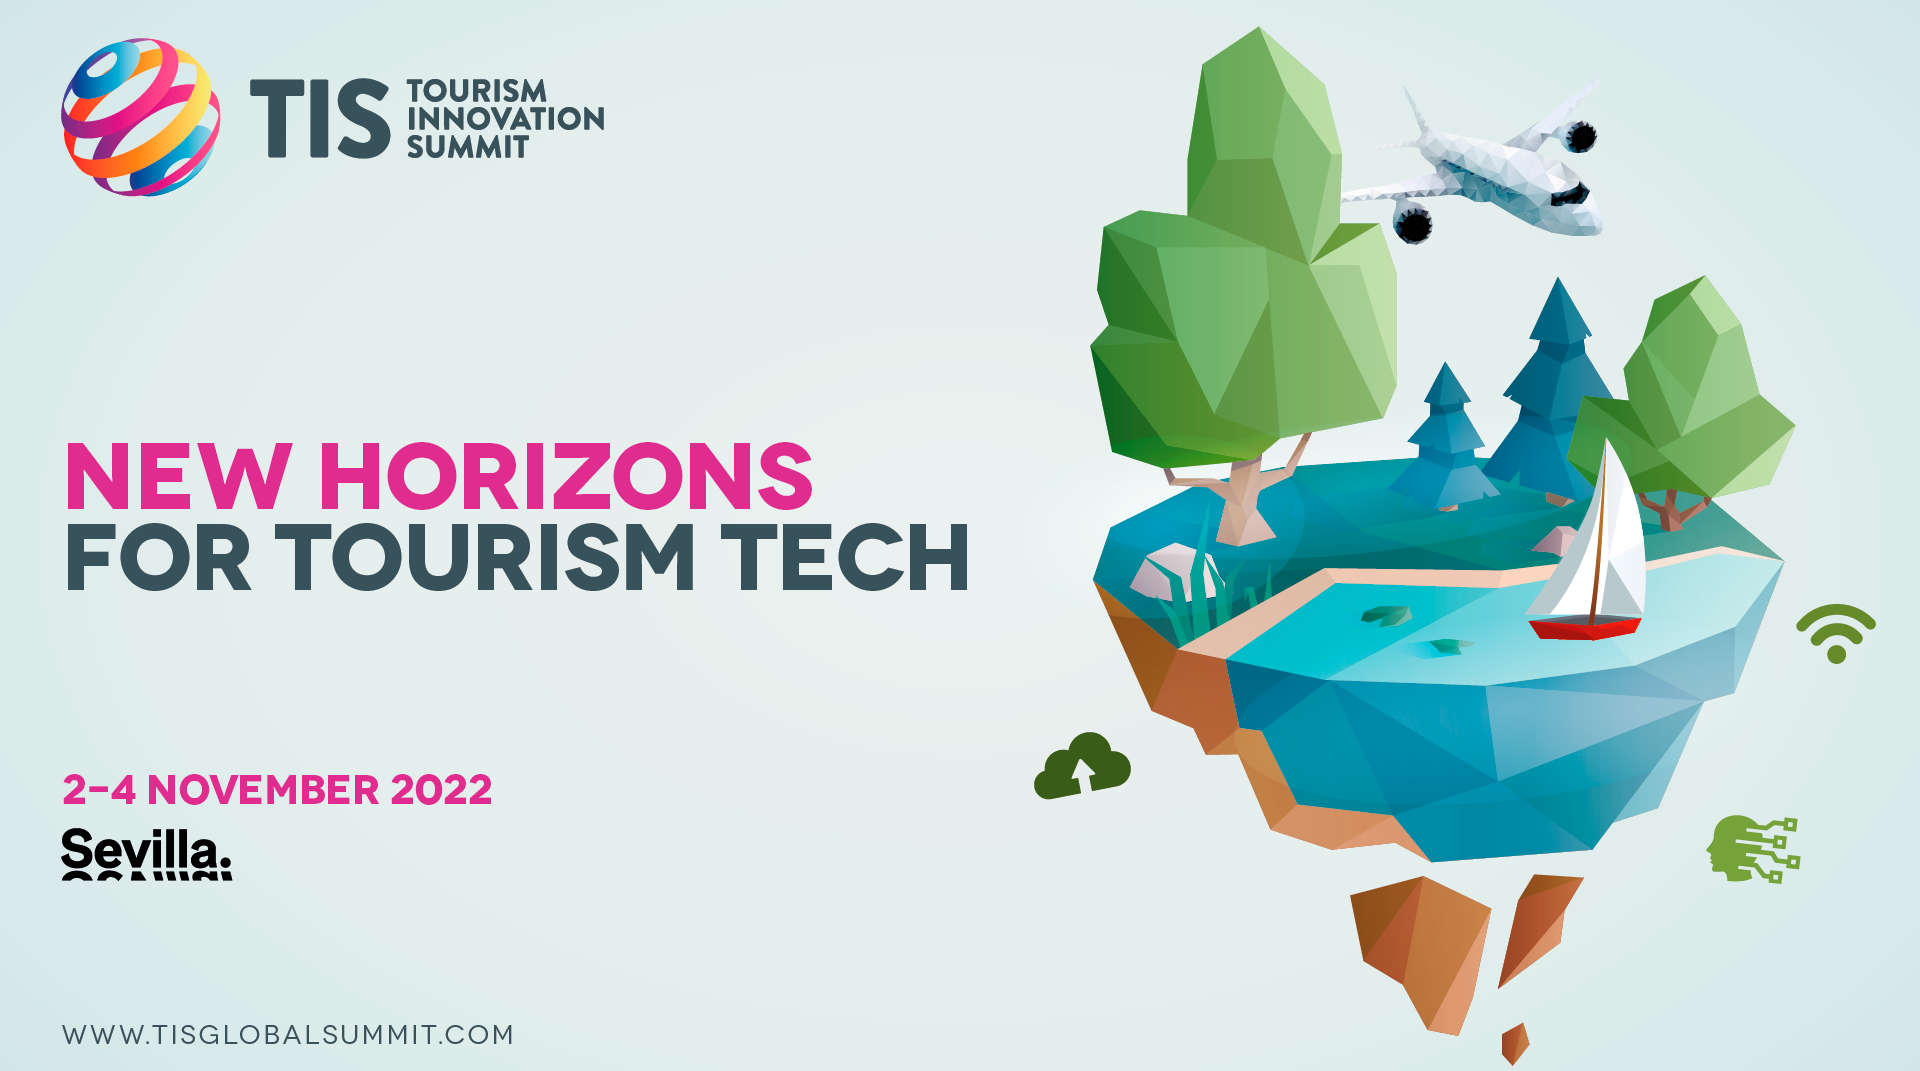 Official image of Tourism Innovation Summit 2022